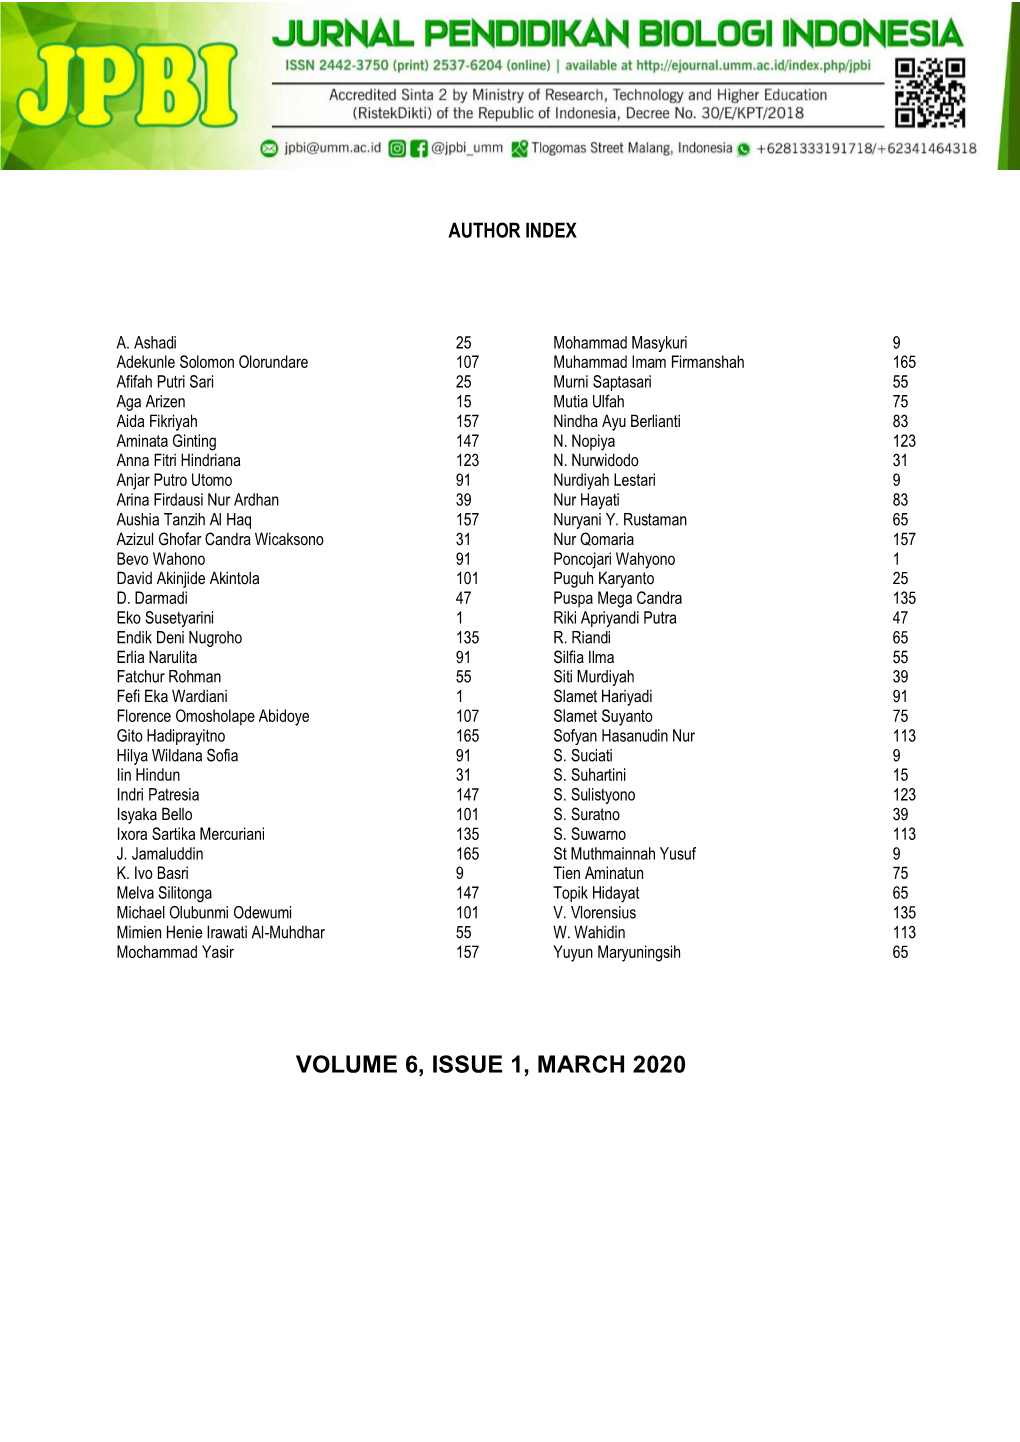 Volume 6, Issue 1, March 2020